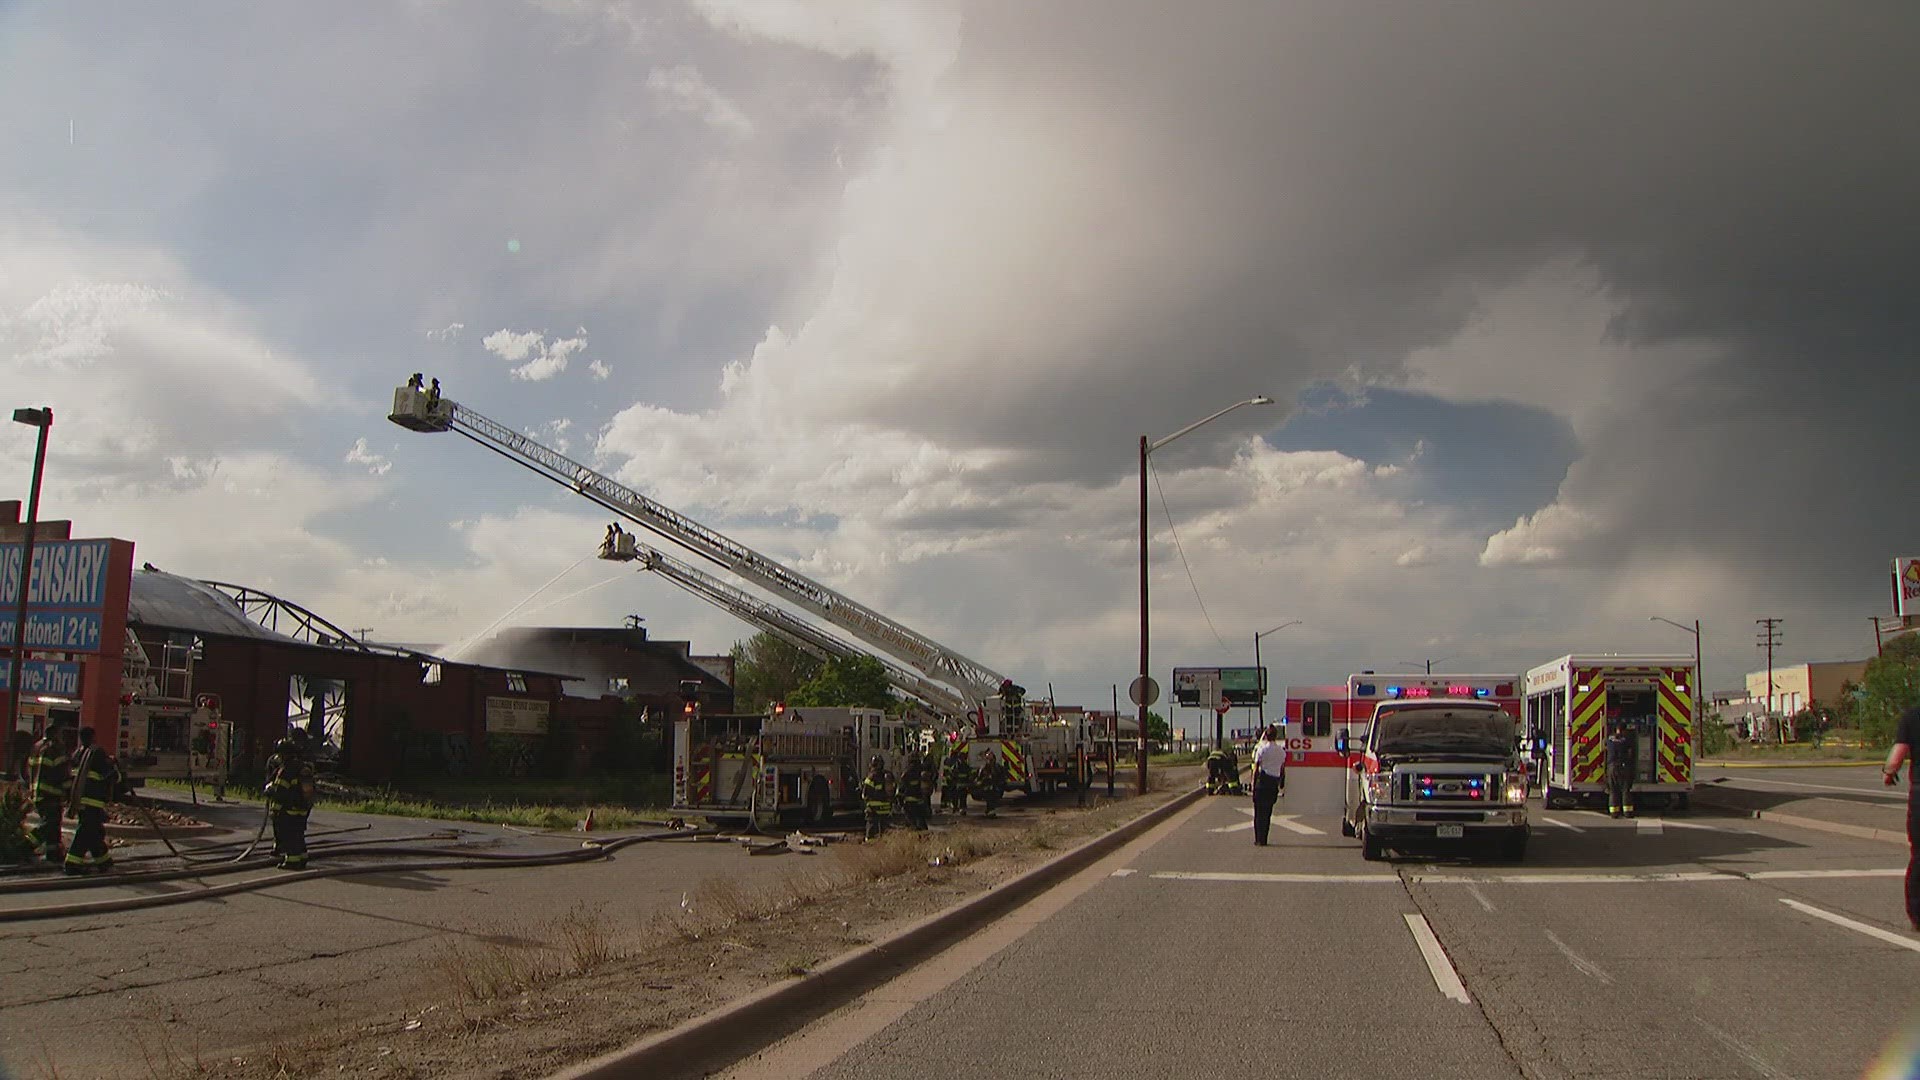 A plume of black smoke was visible from the fire at 50th Avenue and Colorado Boulevard.